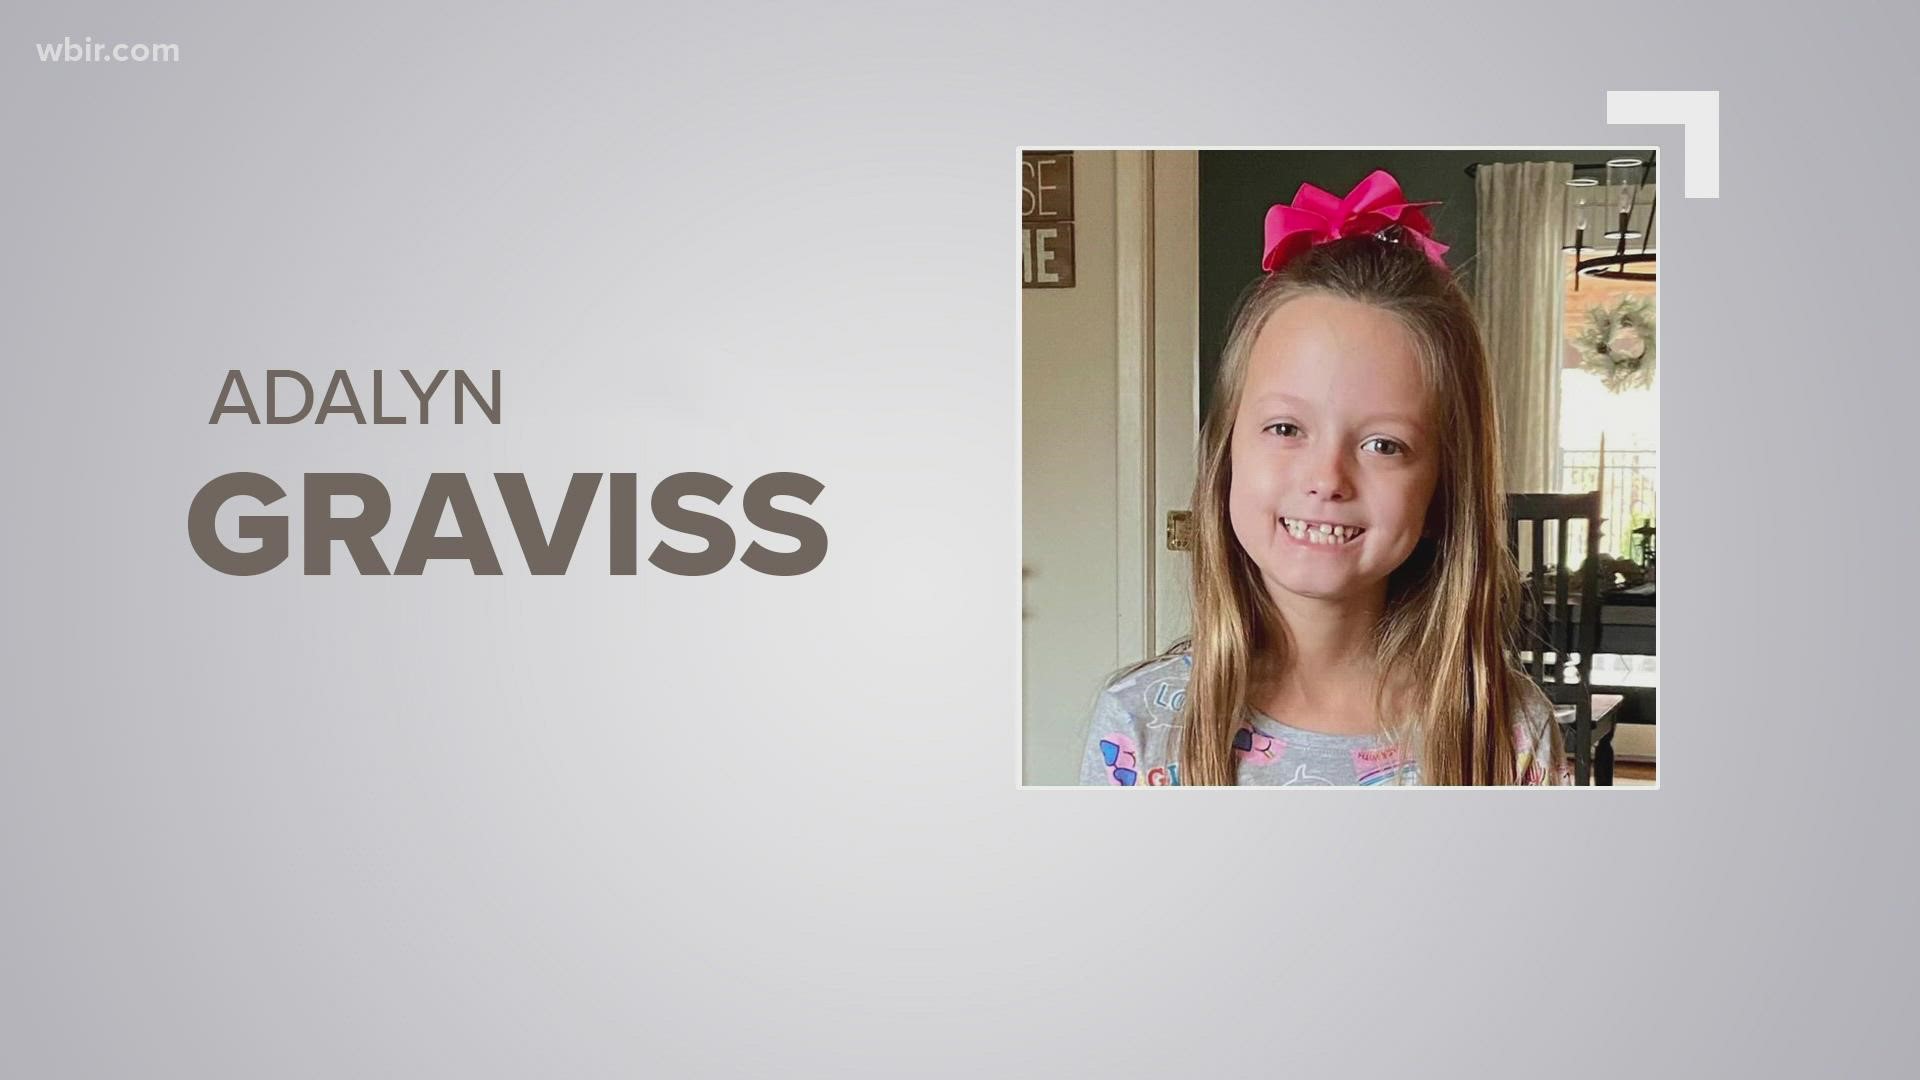 Adalyn Graviss died from a rare autoimmune disorder triggered by COVID-19.